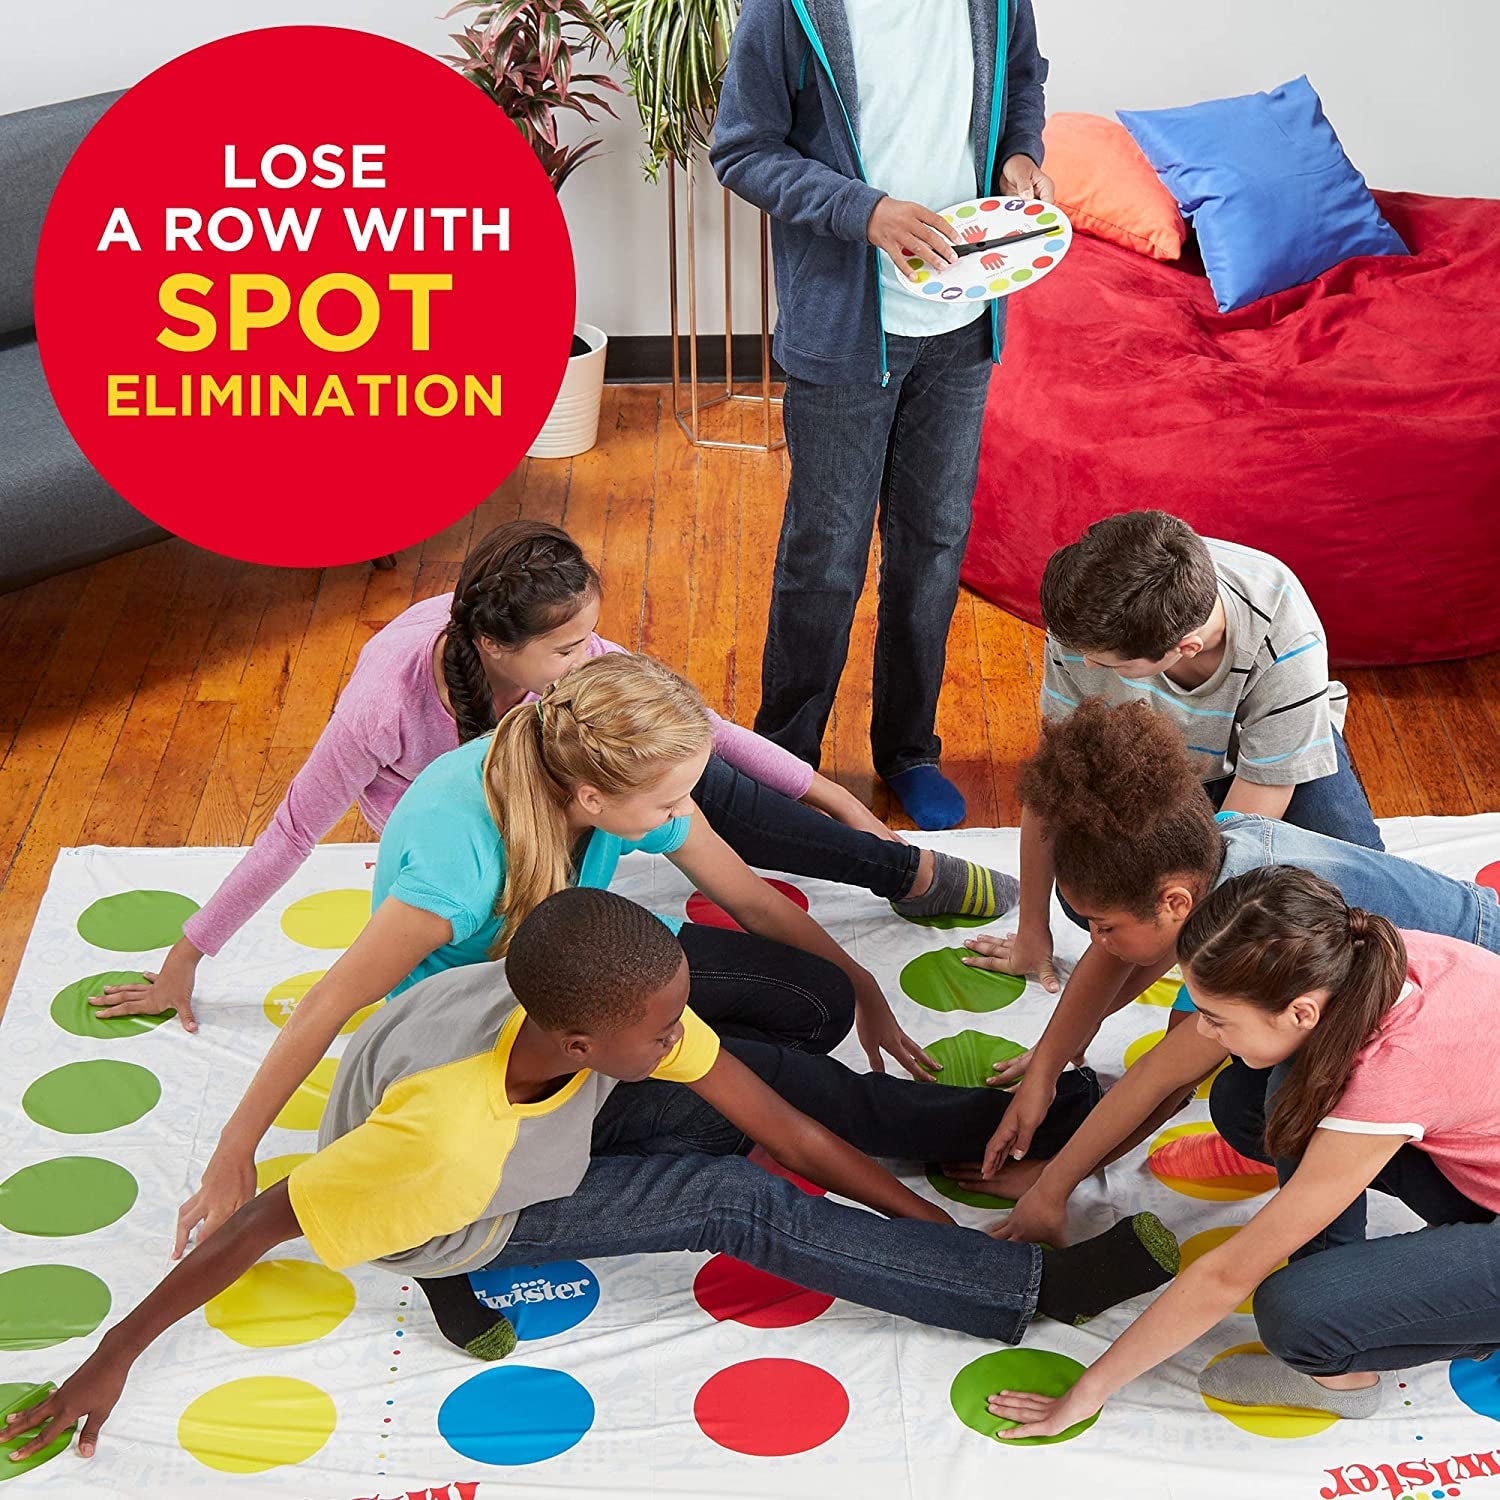 Twister Ultimate: Bigger Mat, More Colored Spots, Family Game Age 6+